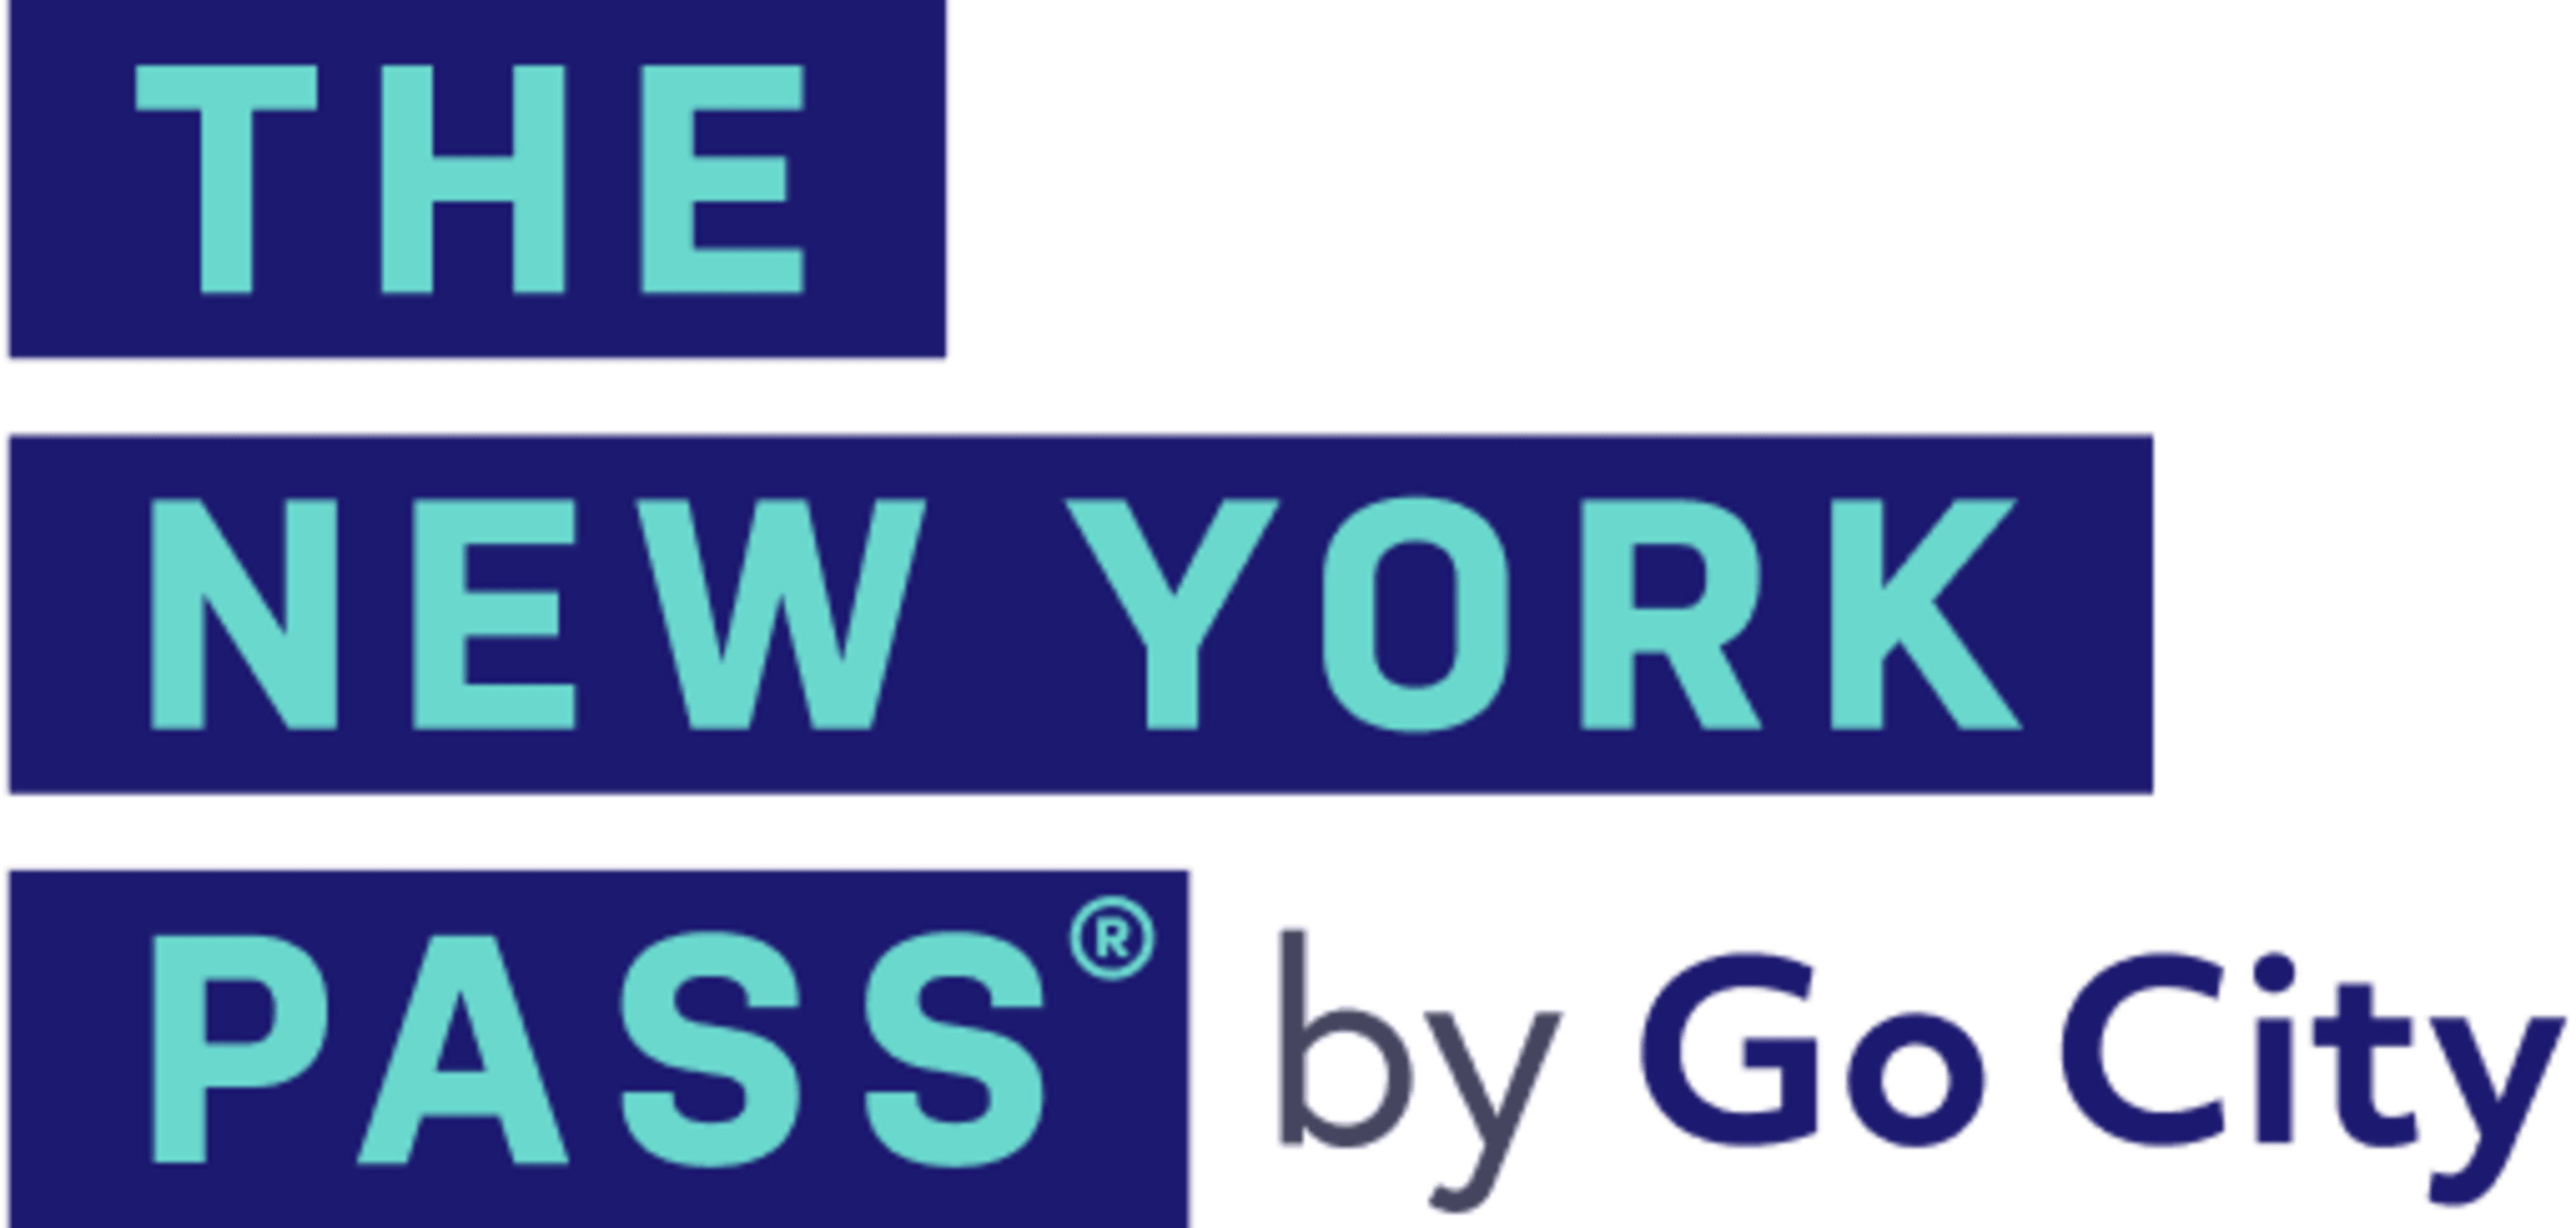 The New York Pass by Go City logo